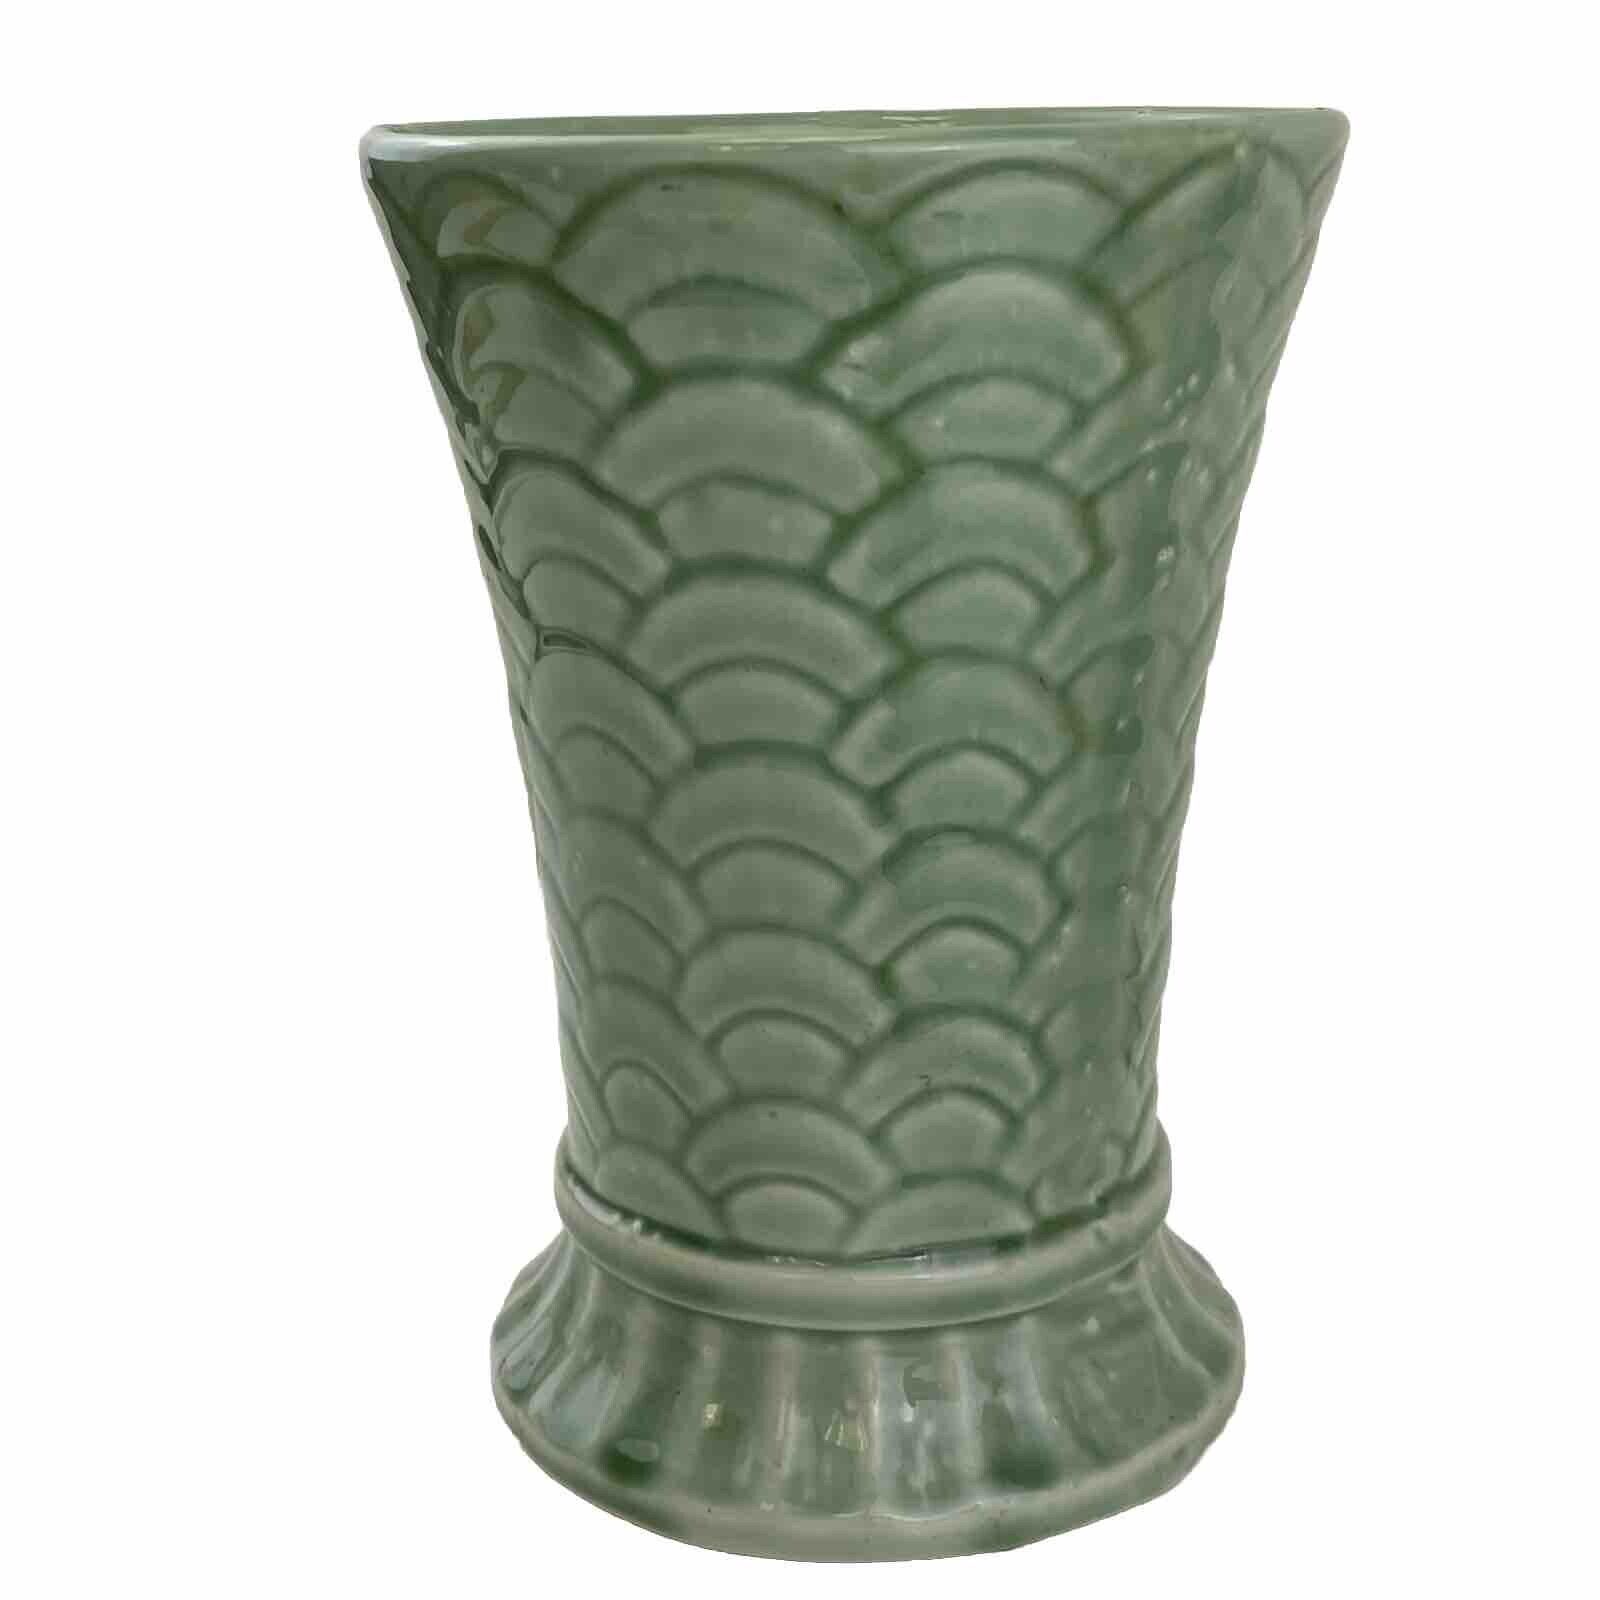 Large Vintage Monmouth Pottery Vase Green Scalloped Fish Scale Design Sage